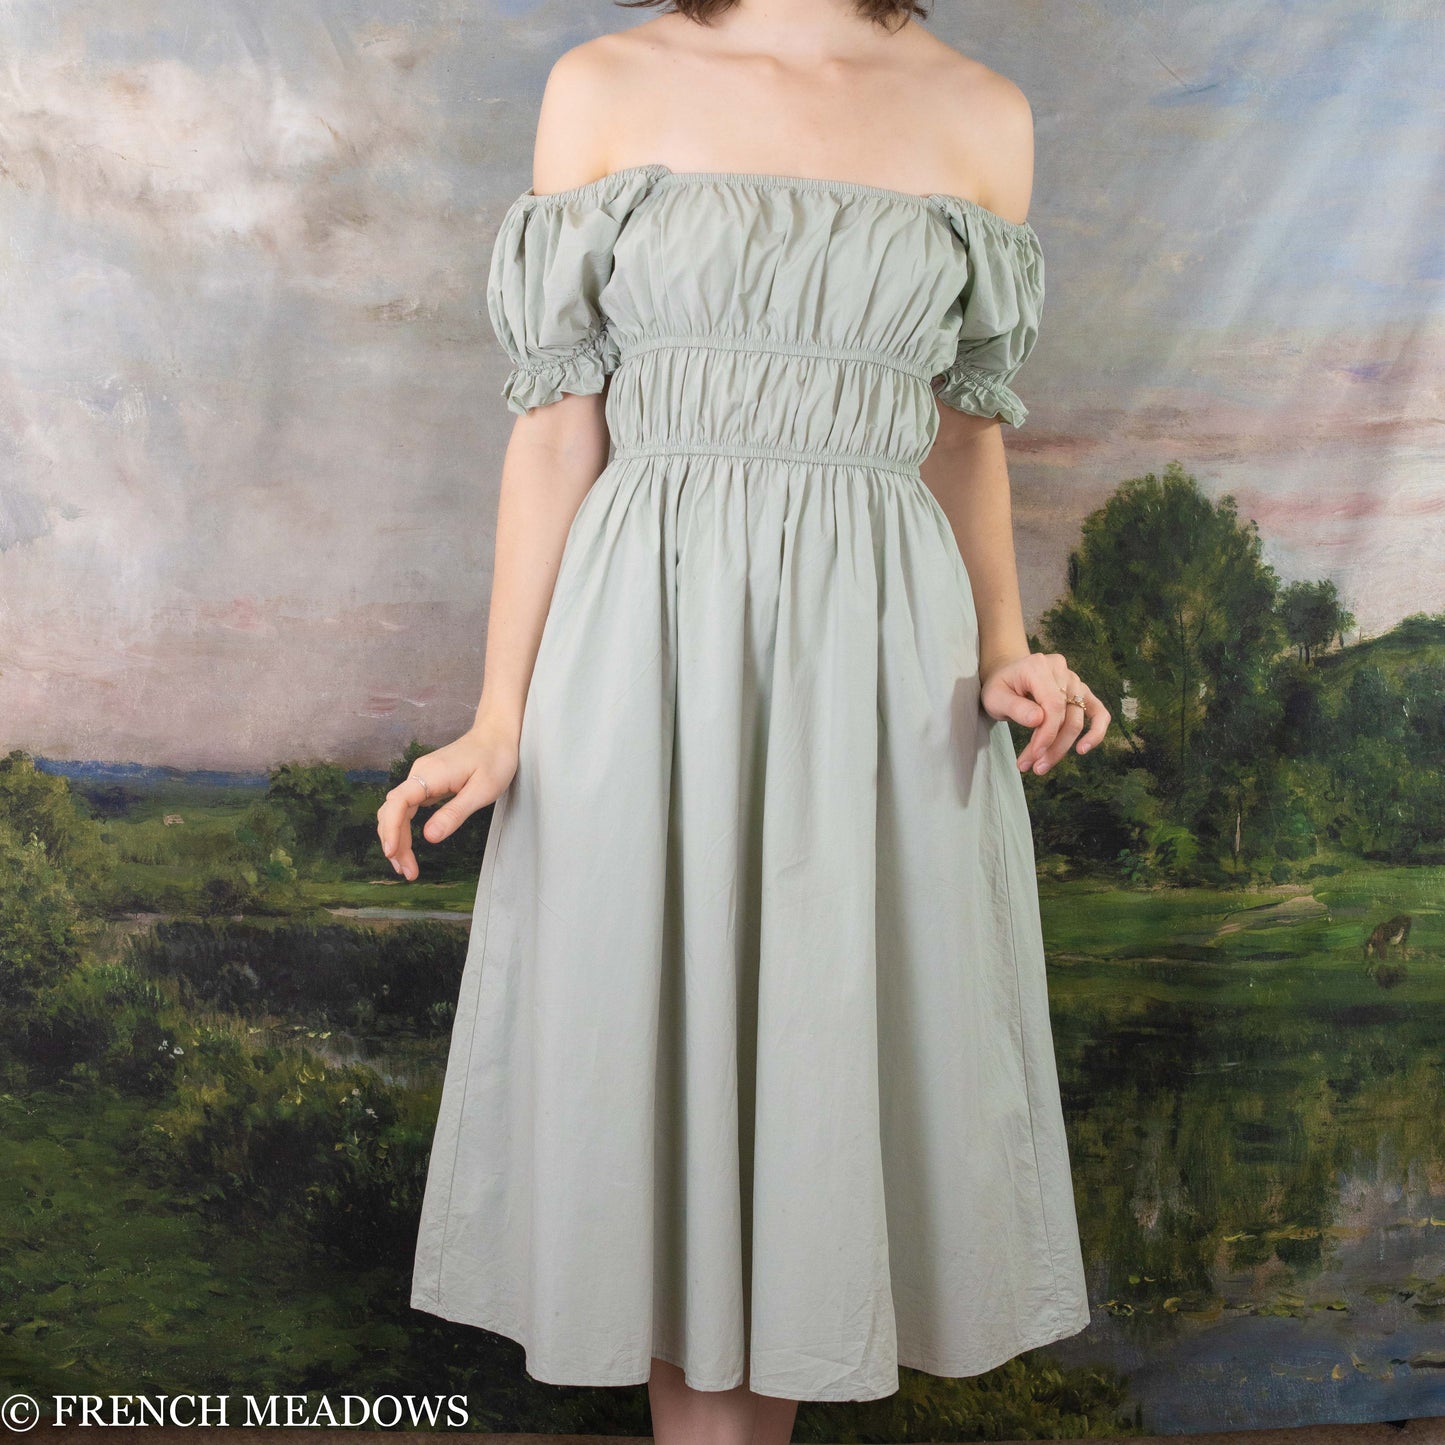 Load image into Gallery viewer, modeling wearing light green cotton dress off her shoulders
